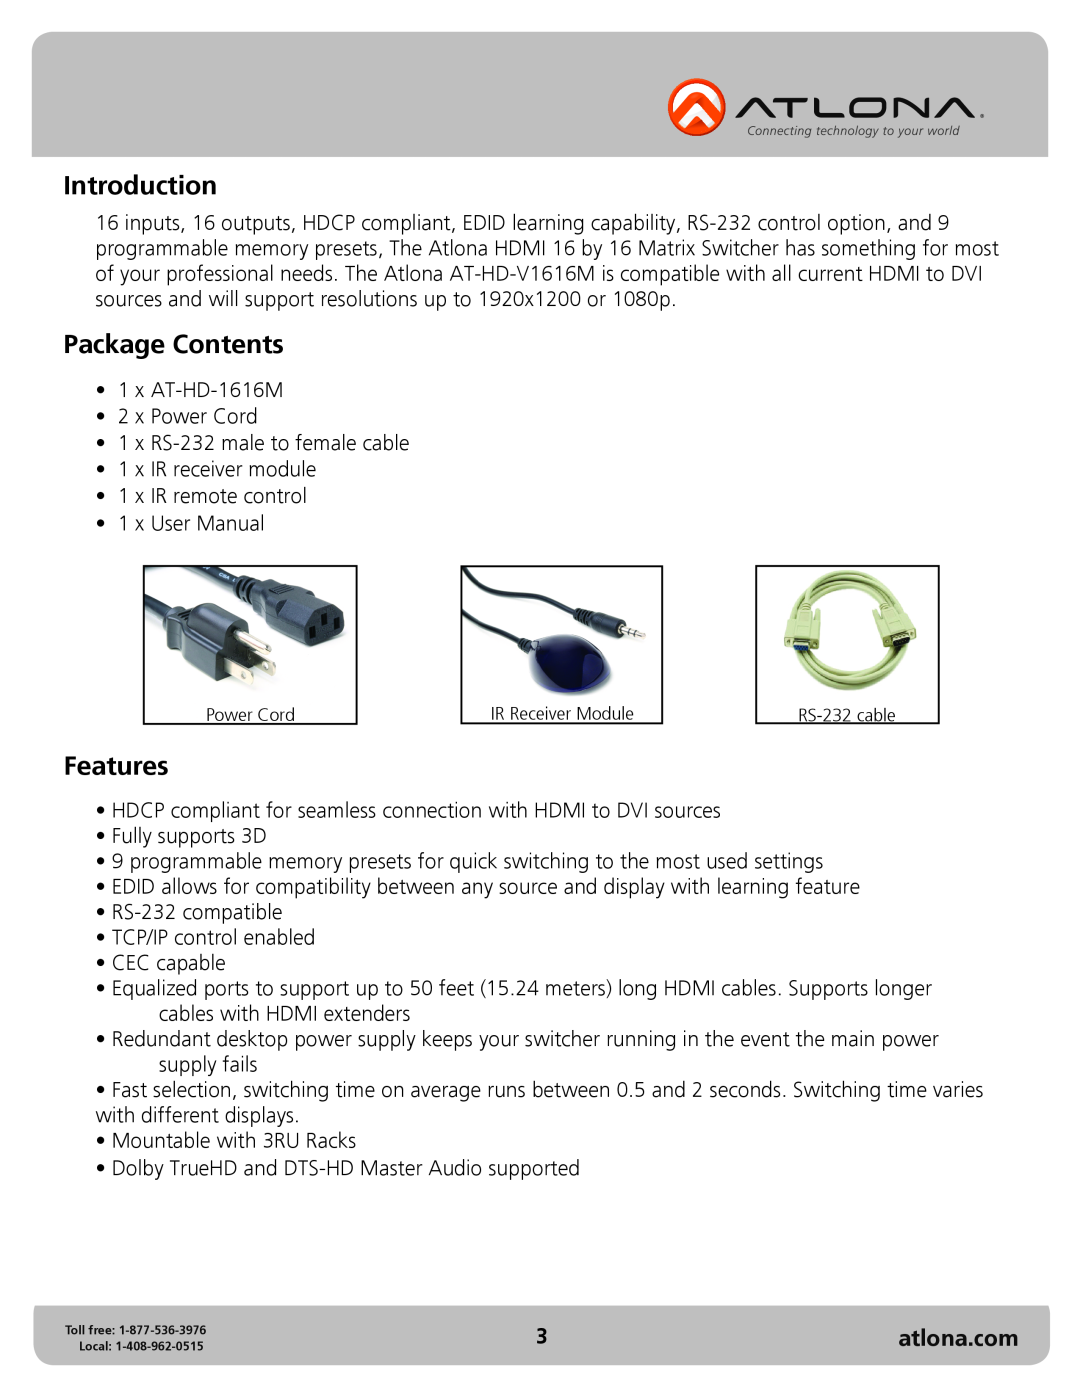 Atlona AT-HD-V1616M user manual Introduction, Package Contents, Features, atlona.com 